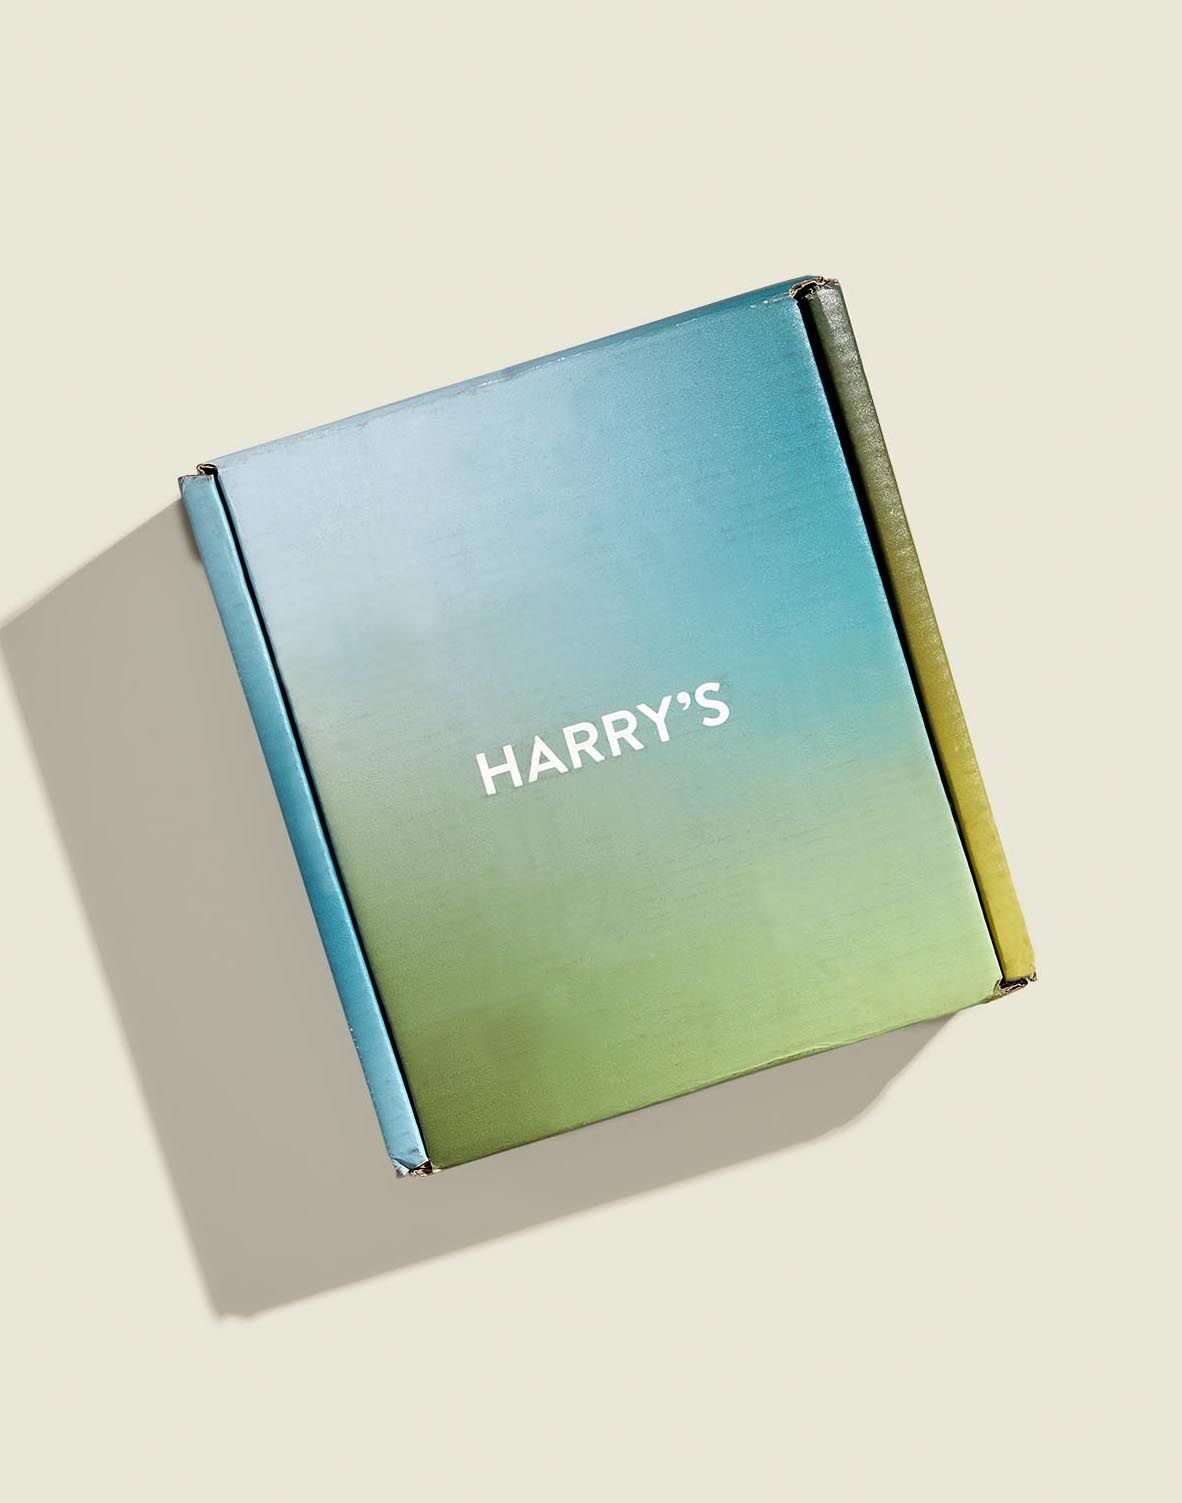 Project - Harry's